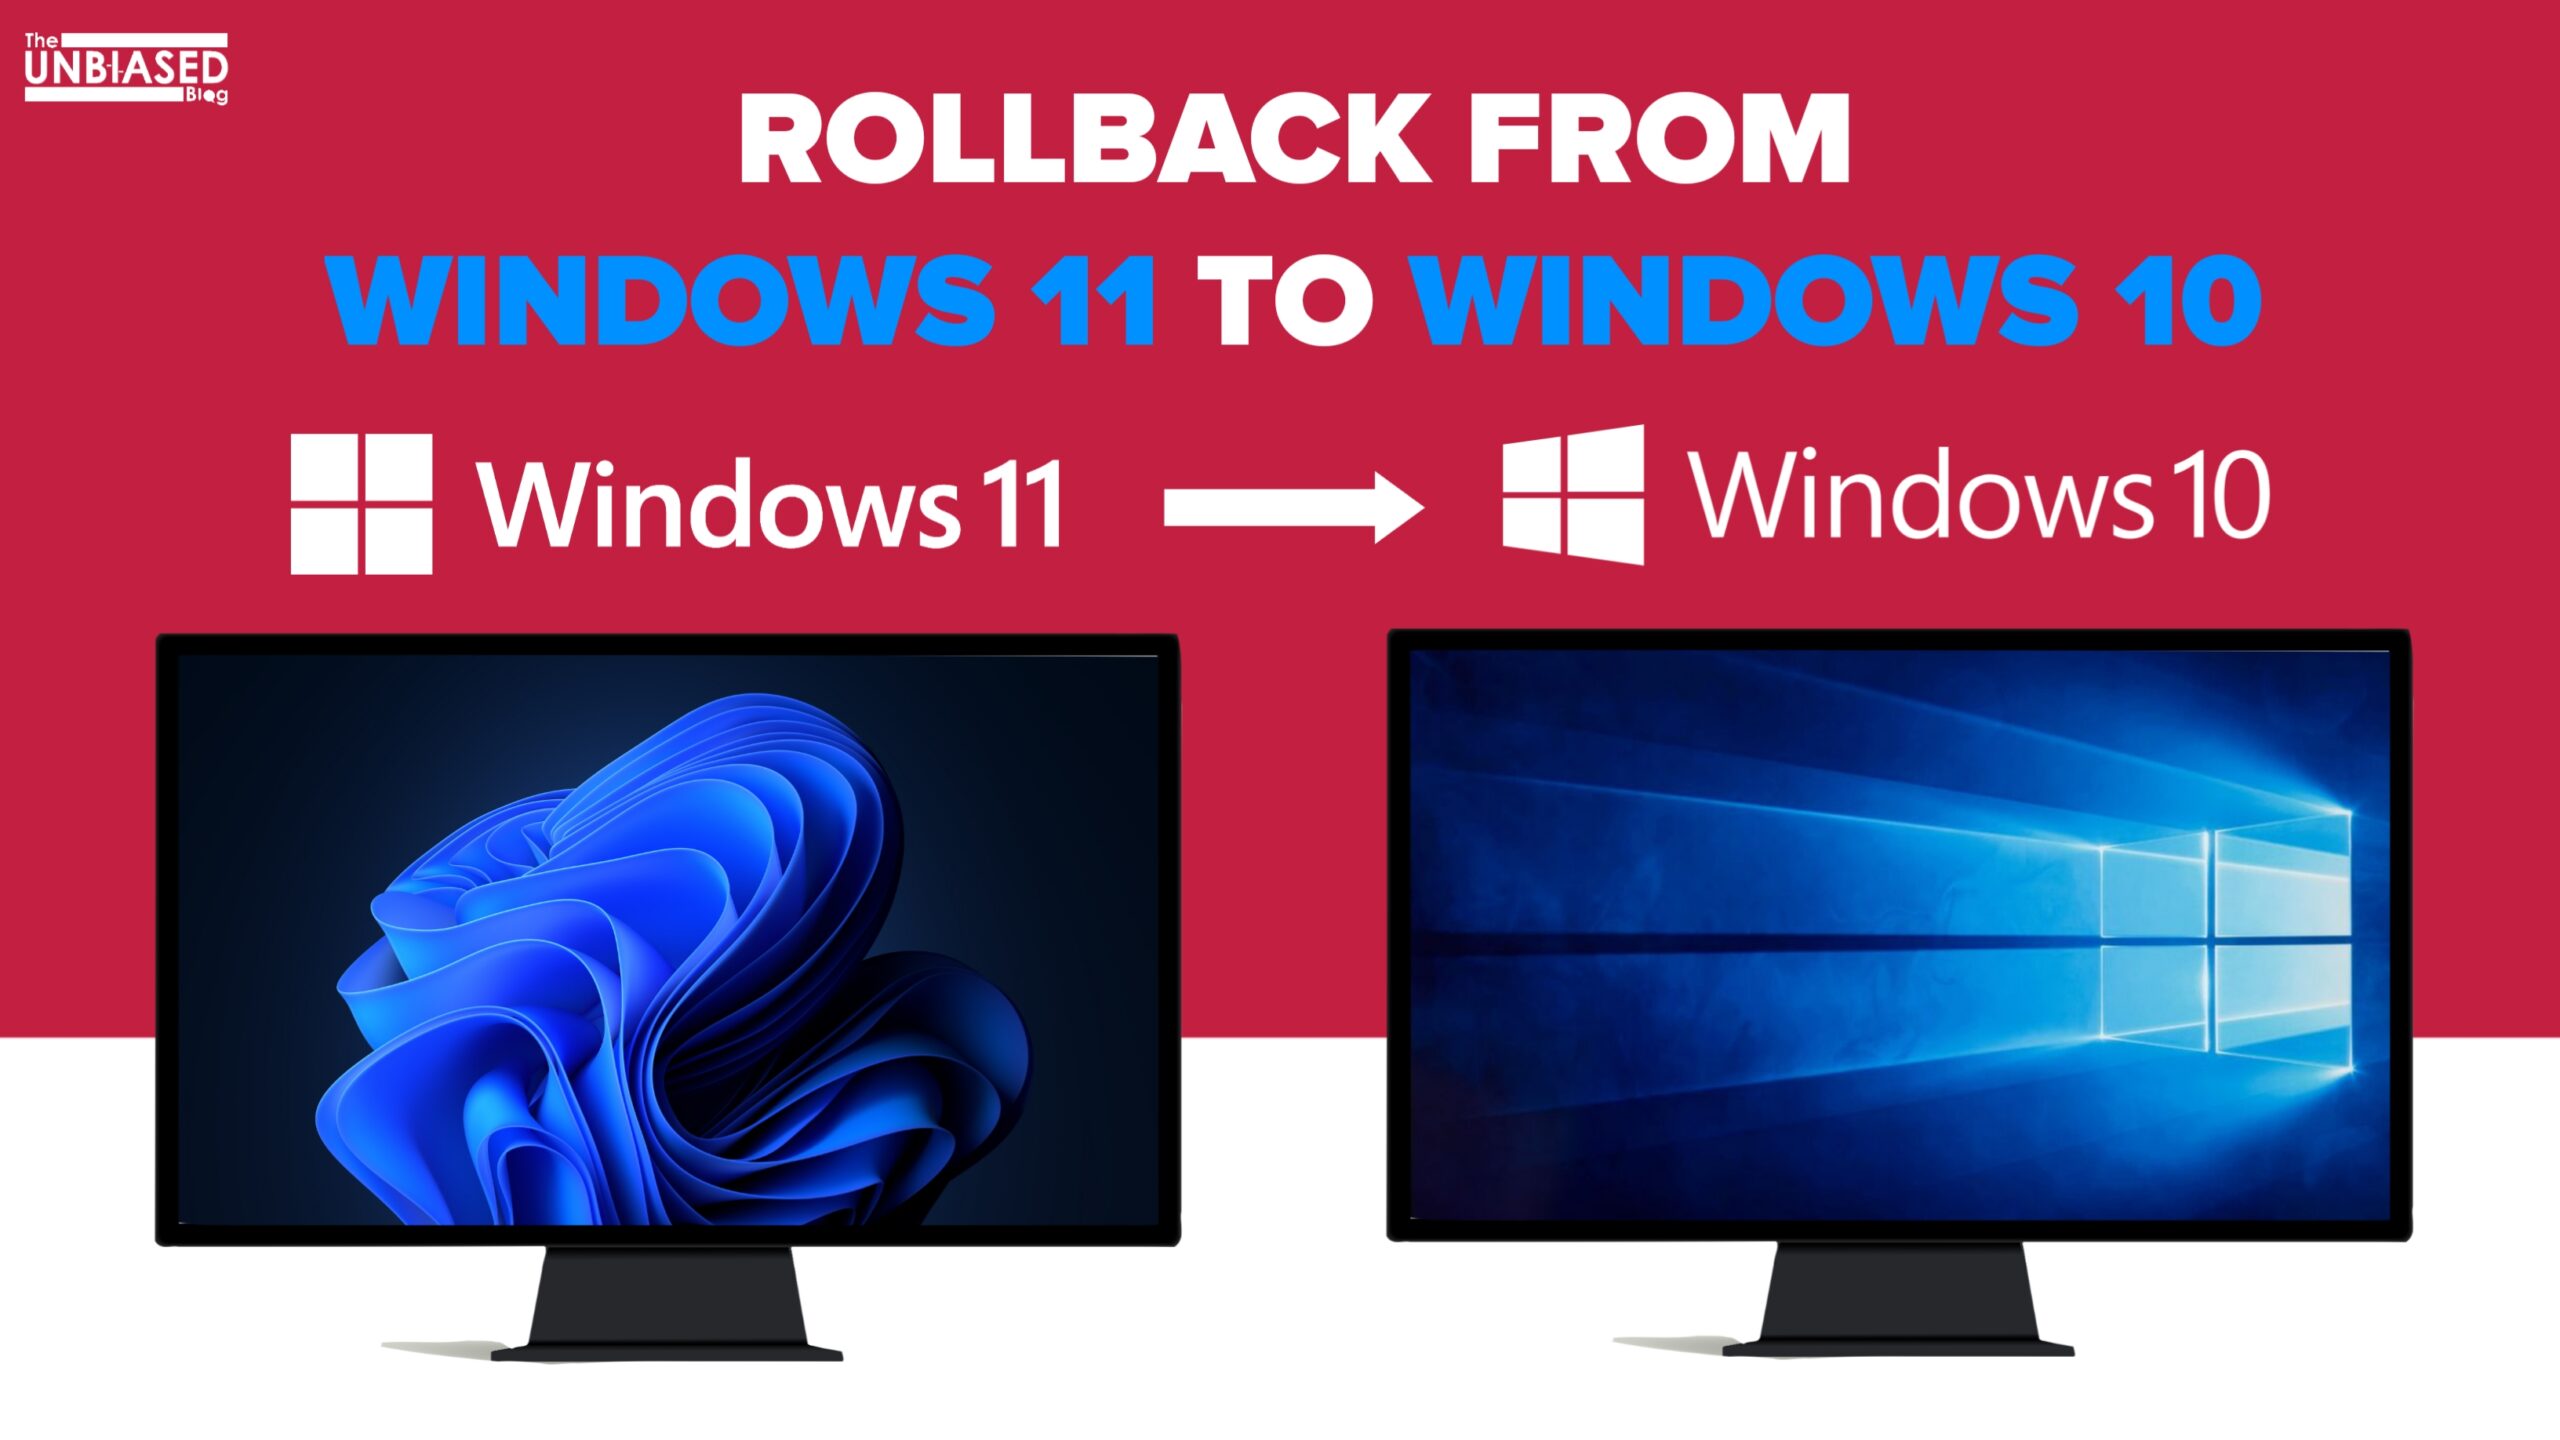 How To Roll Back From Windows 11 To Windows 10 Without Losing Data